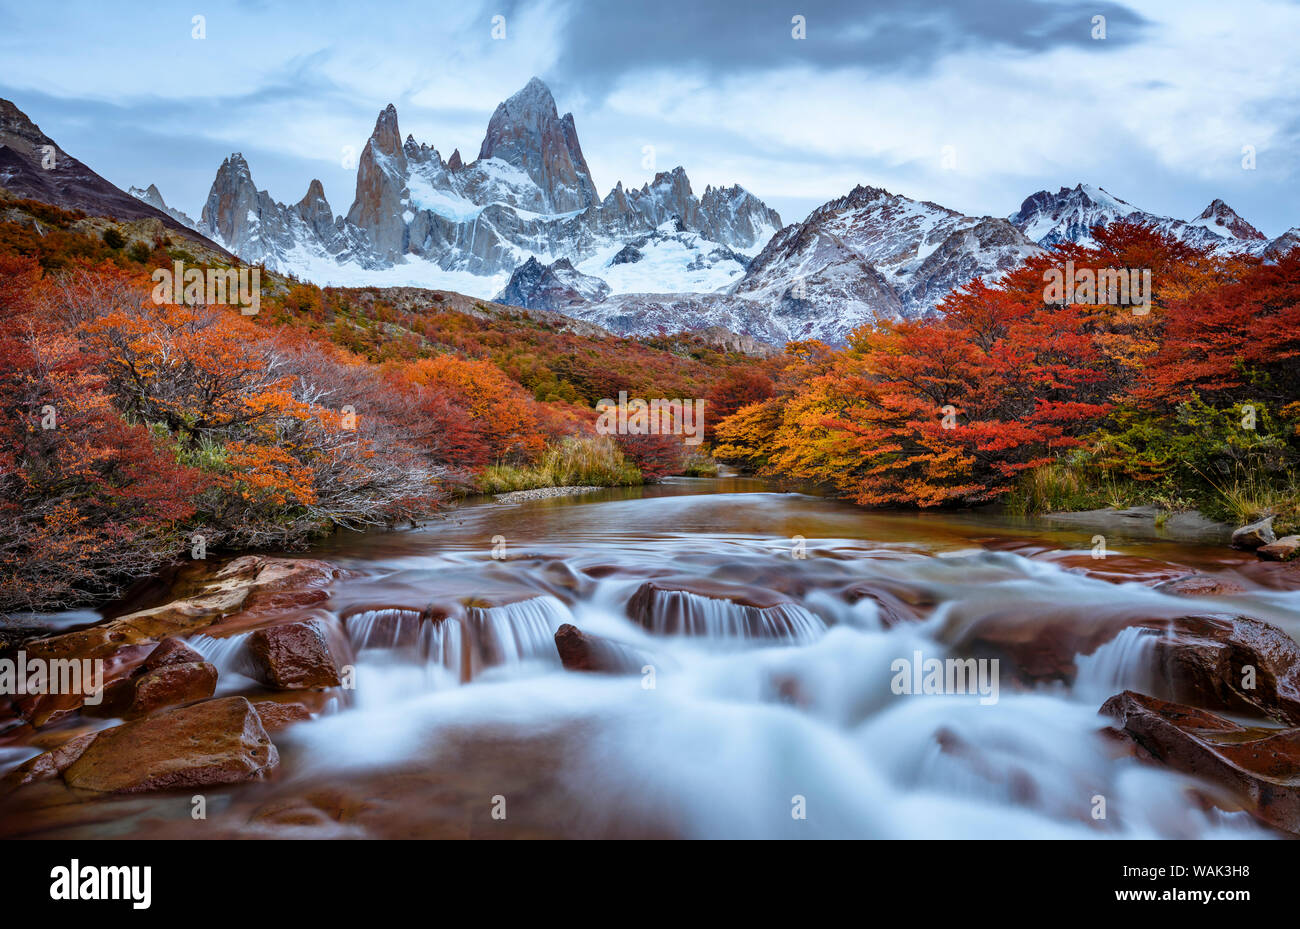 Argentina, Los Glaciares National Park. Mt. Fitz Roy and Lenga beech trees in fall. Stock Photo